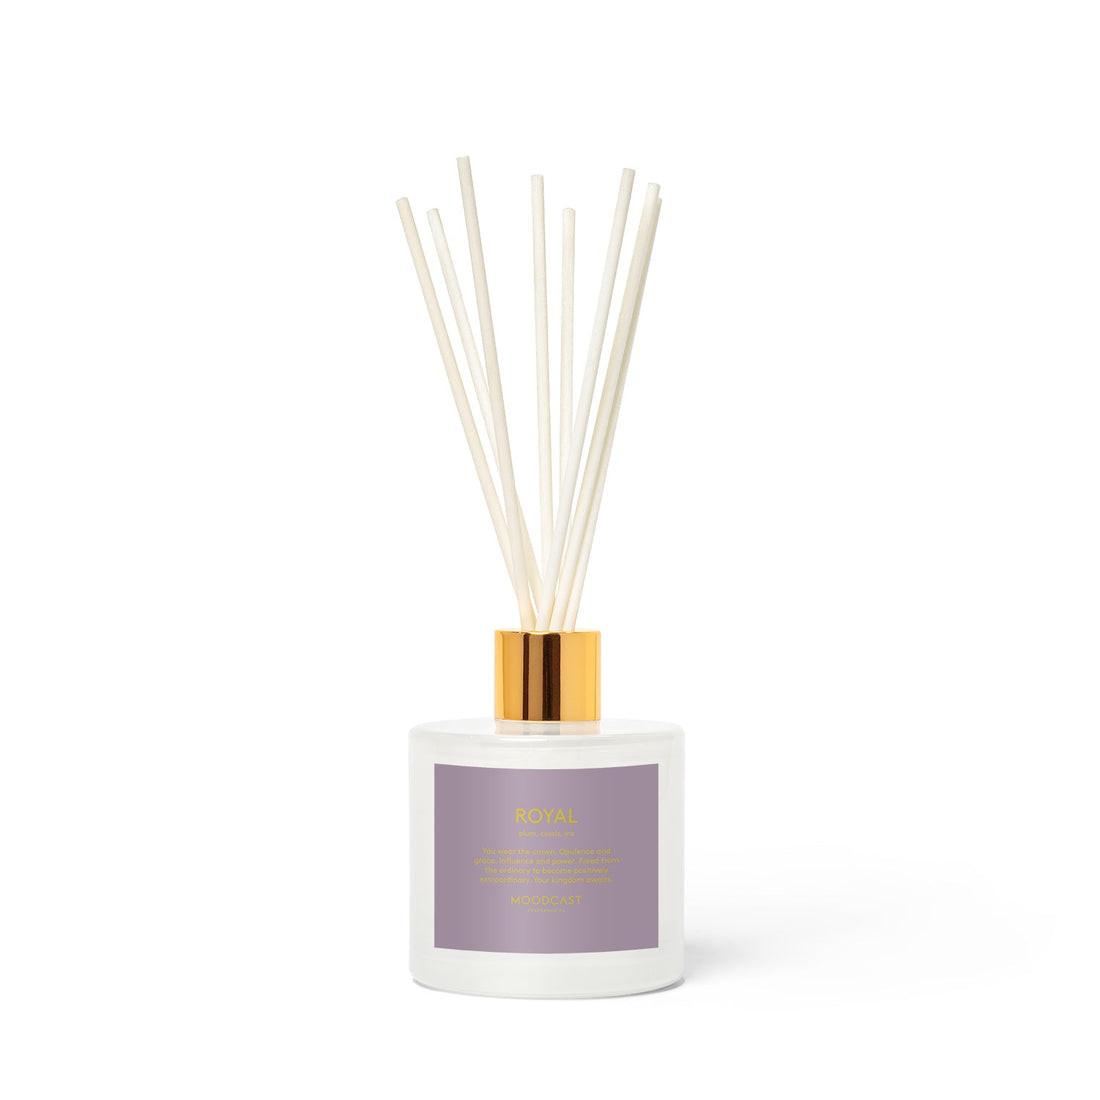 Royal - Persona Collection (White & Gold) - 3.4fl oz/100ml Glass Reed Diffuser - Key Notes: Plum, Cassis, Iris